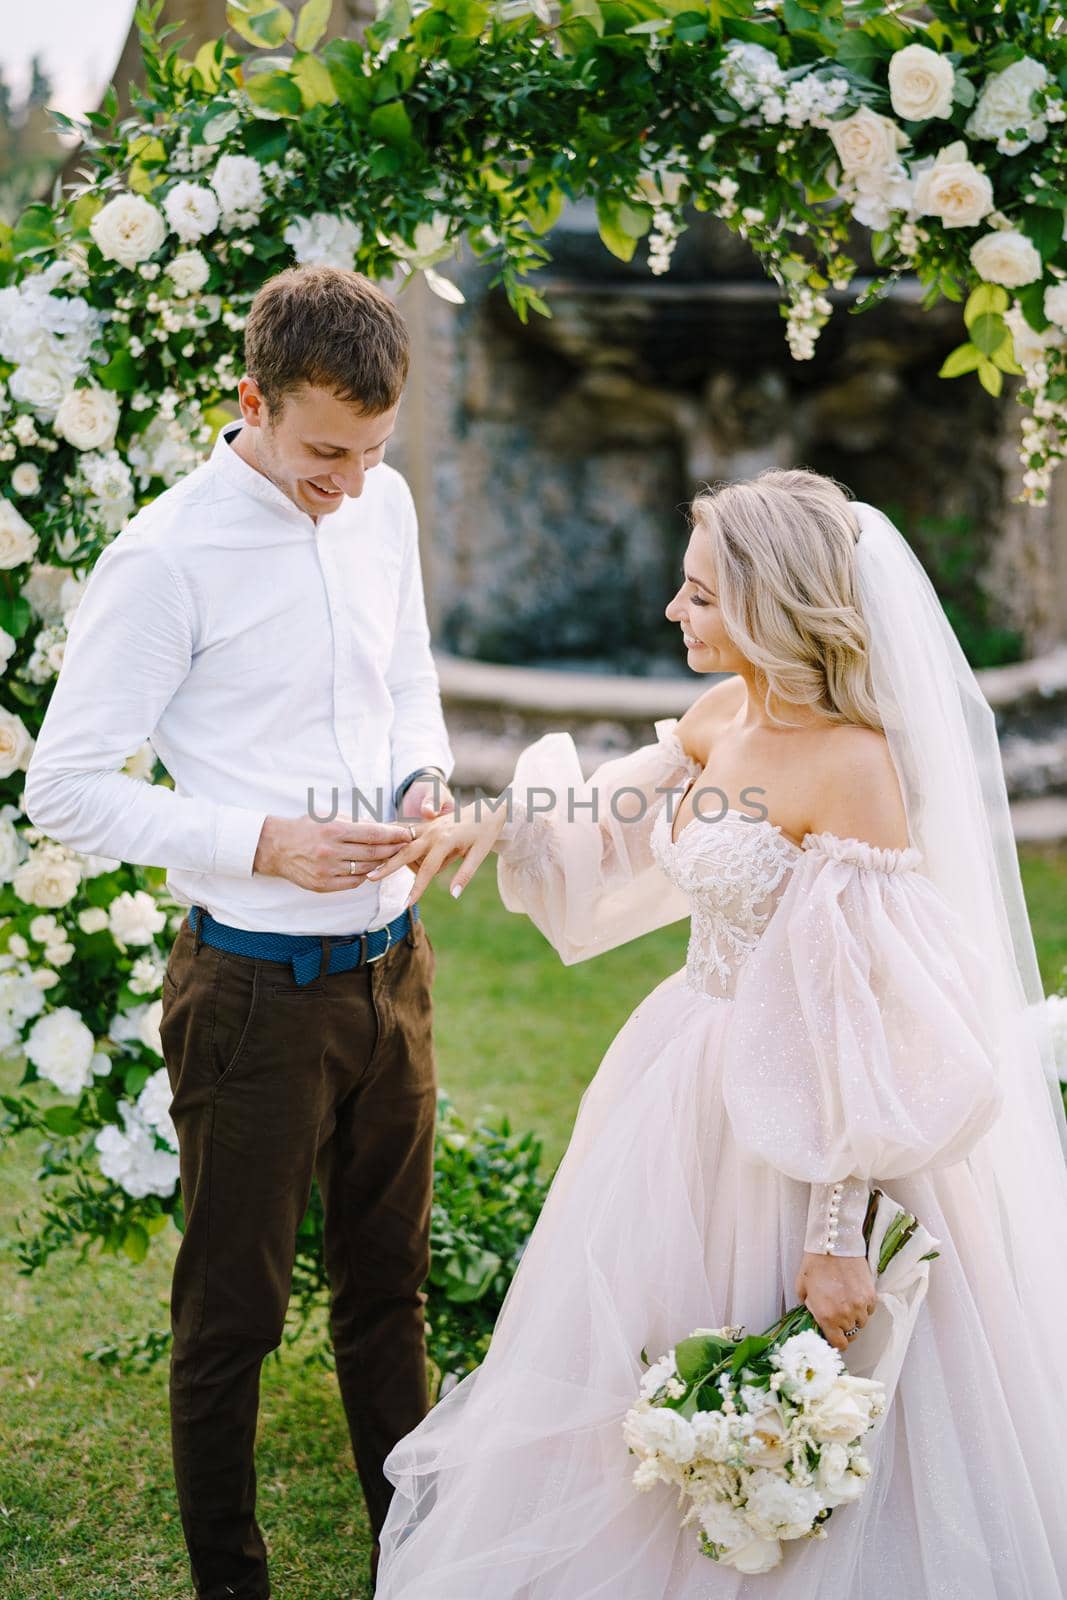 Wedding at an old winery villa in Tuscany, Italy. Round wedding arch decorated with white flowers and greenery in front of an ancient Italian architecture. The groom puts ring on the brides finger.